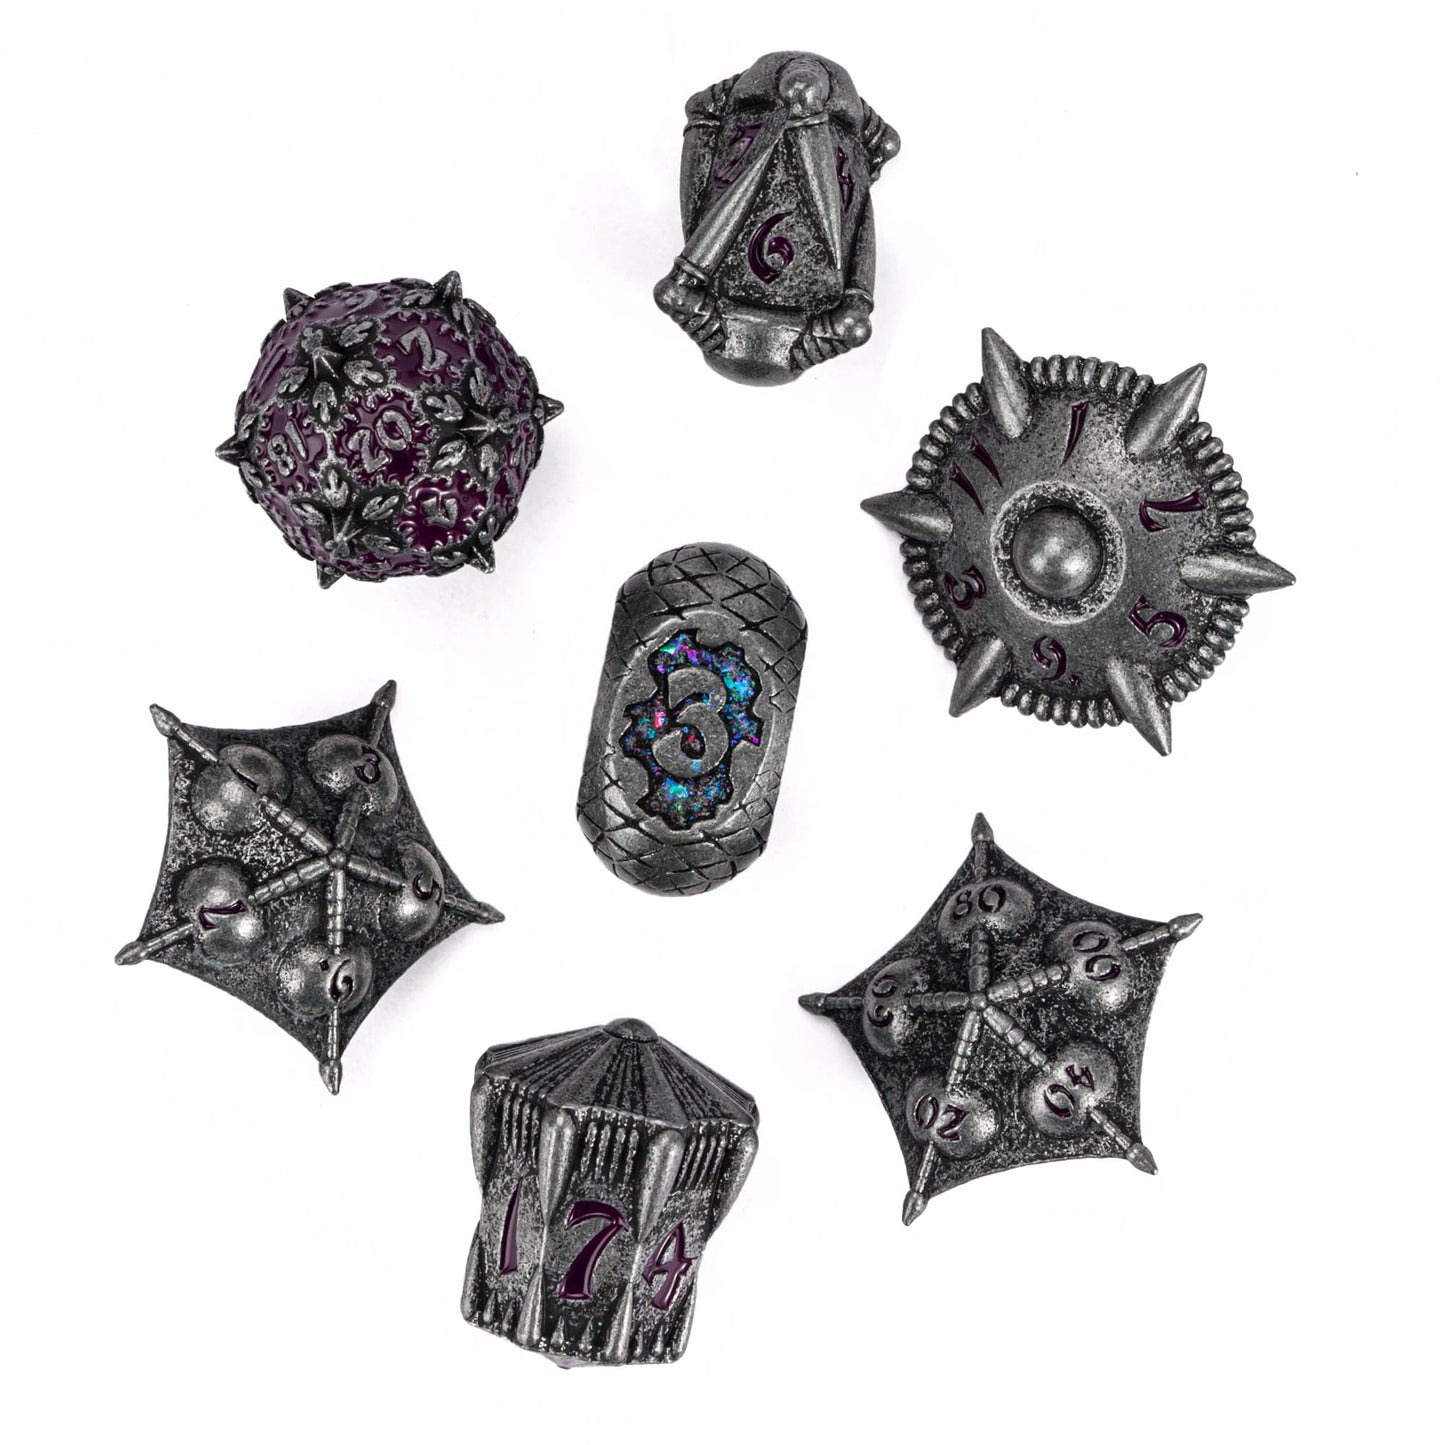 Eldritch Edge - Metal Dice Collection